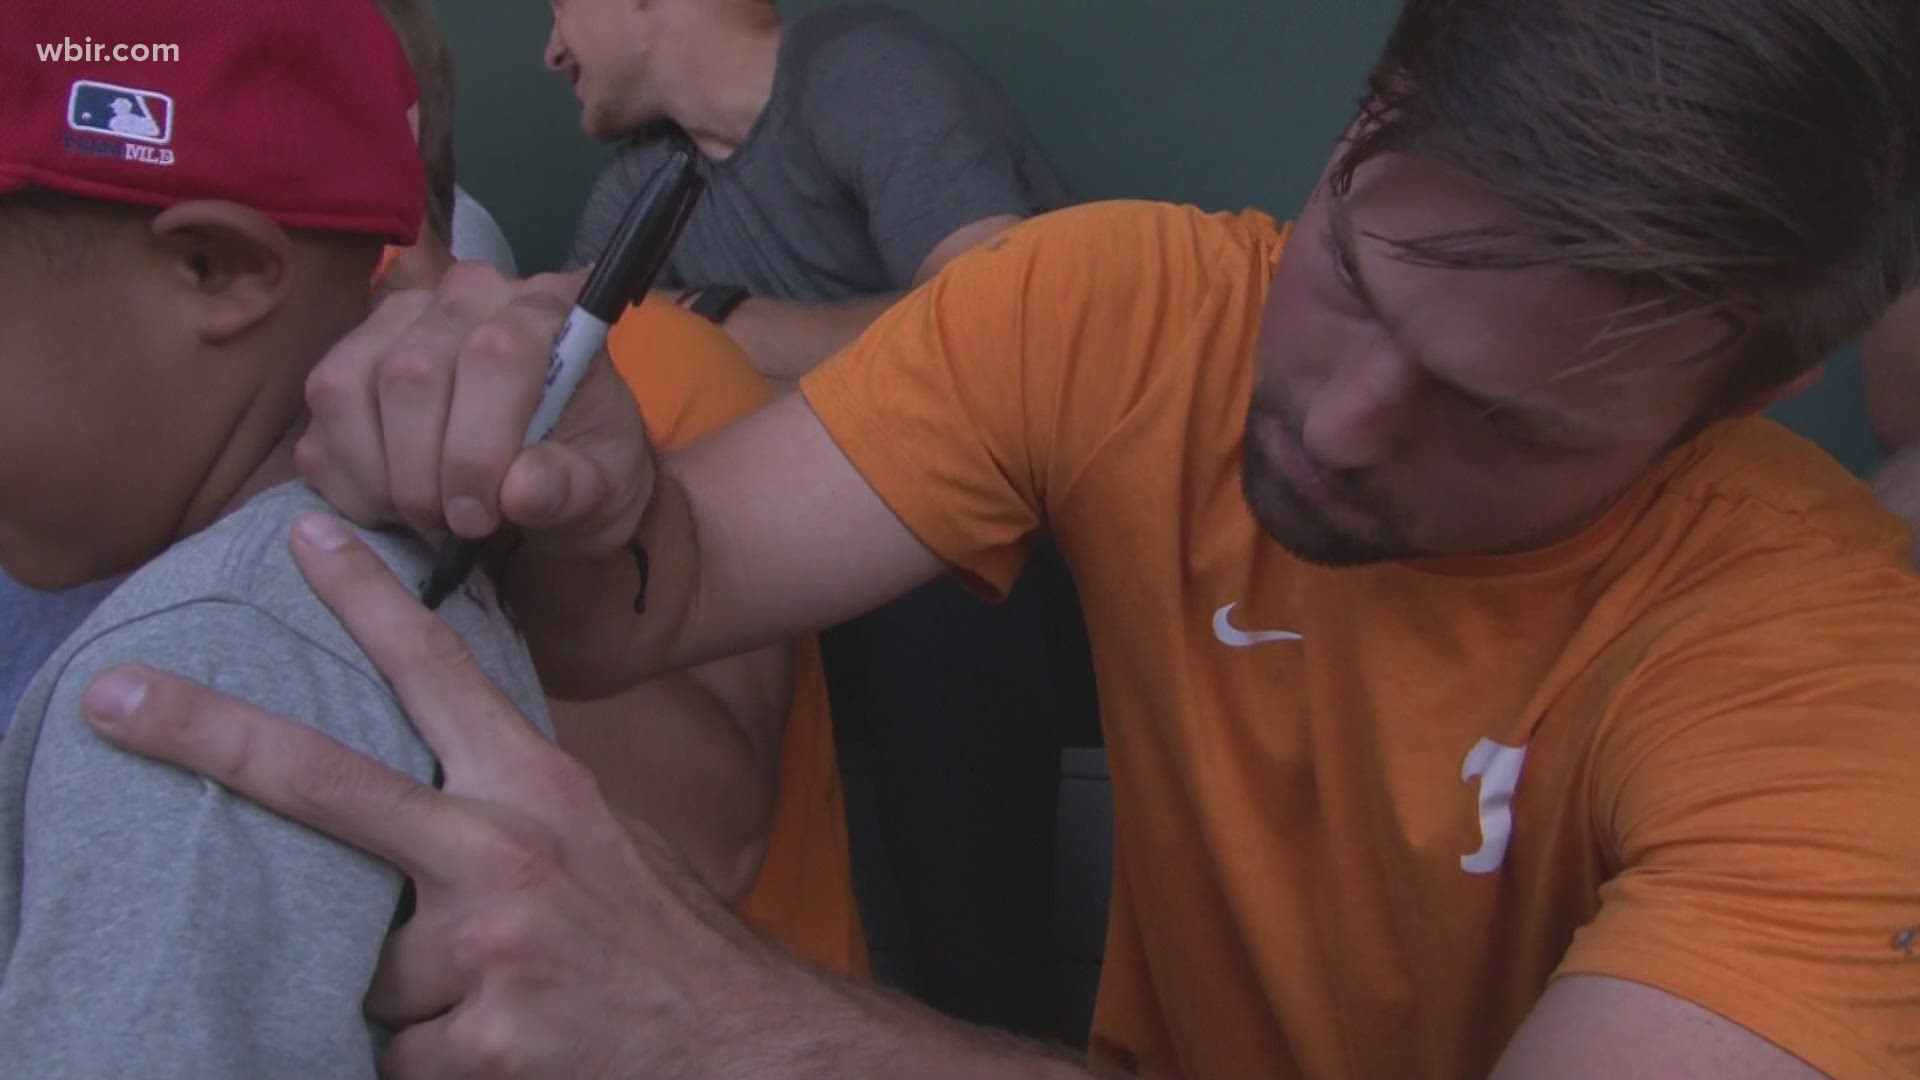 The Vols returned home Wednesday after their first College World Series appearance in 16 years.